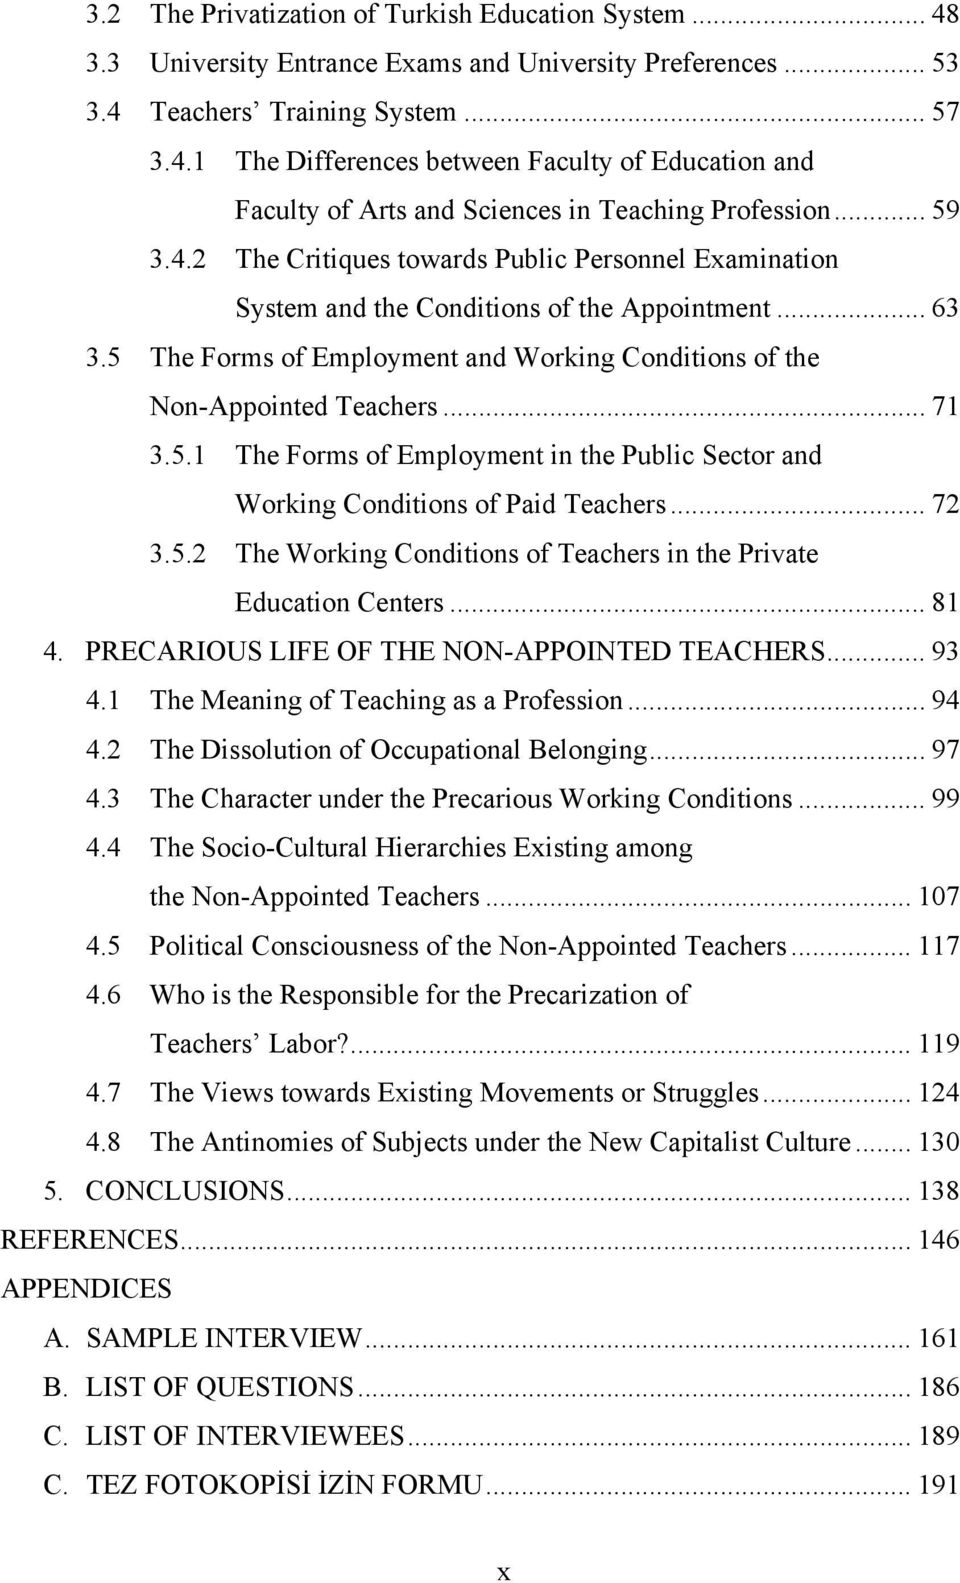 .. 71 3.5.1 The Forms of Employment in the Public Sector and Working Conditions of Paid Teachers... 72 3.5.2 The Working Conditions of Teachers in the Private Education Centers... 81 4.